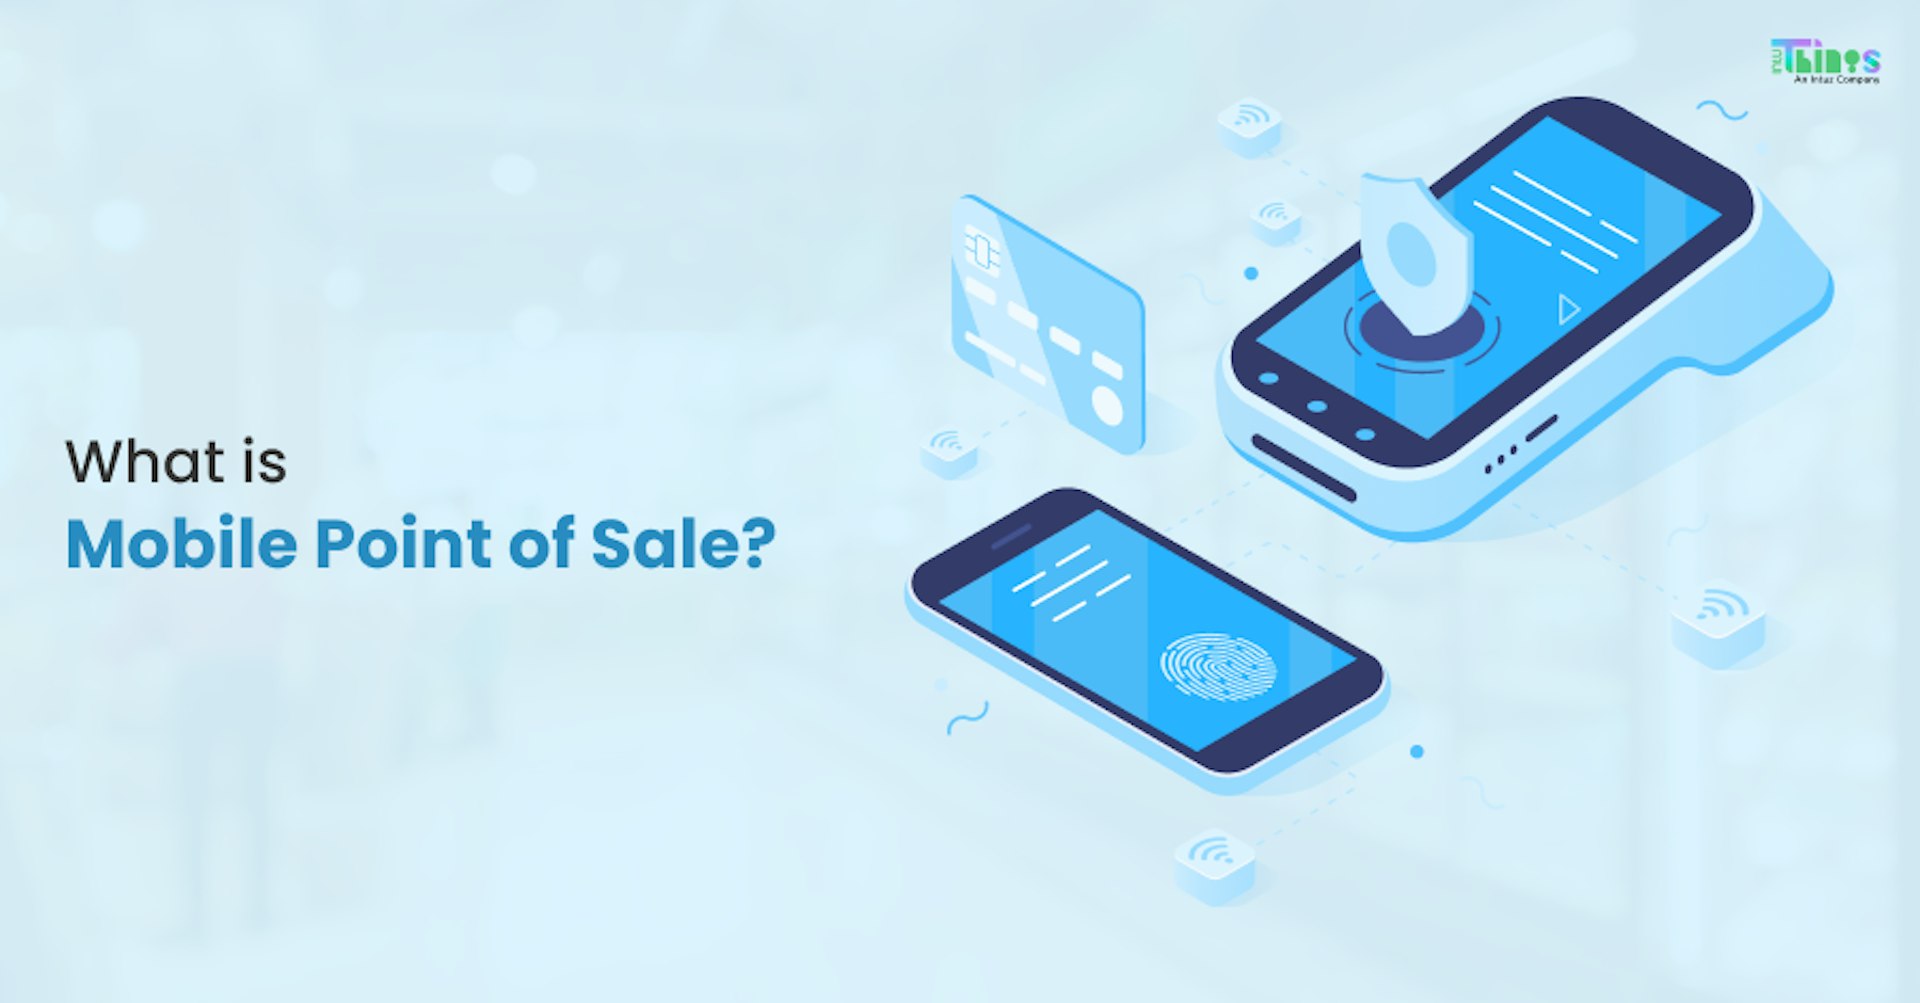 What is Mobile Point of Sale?